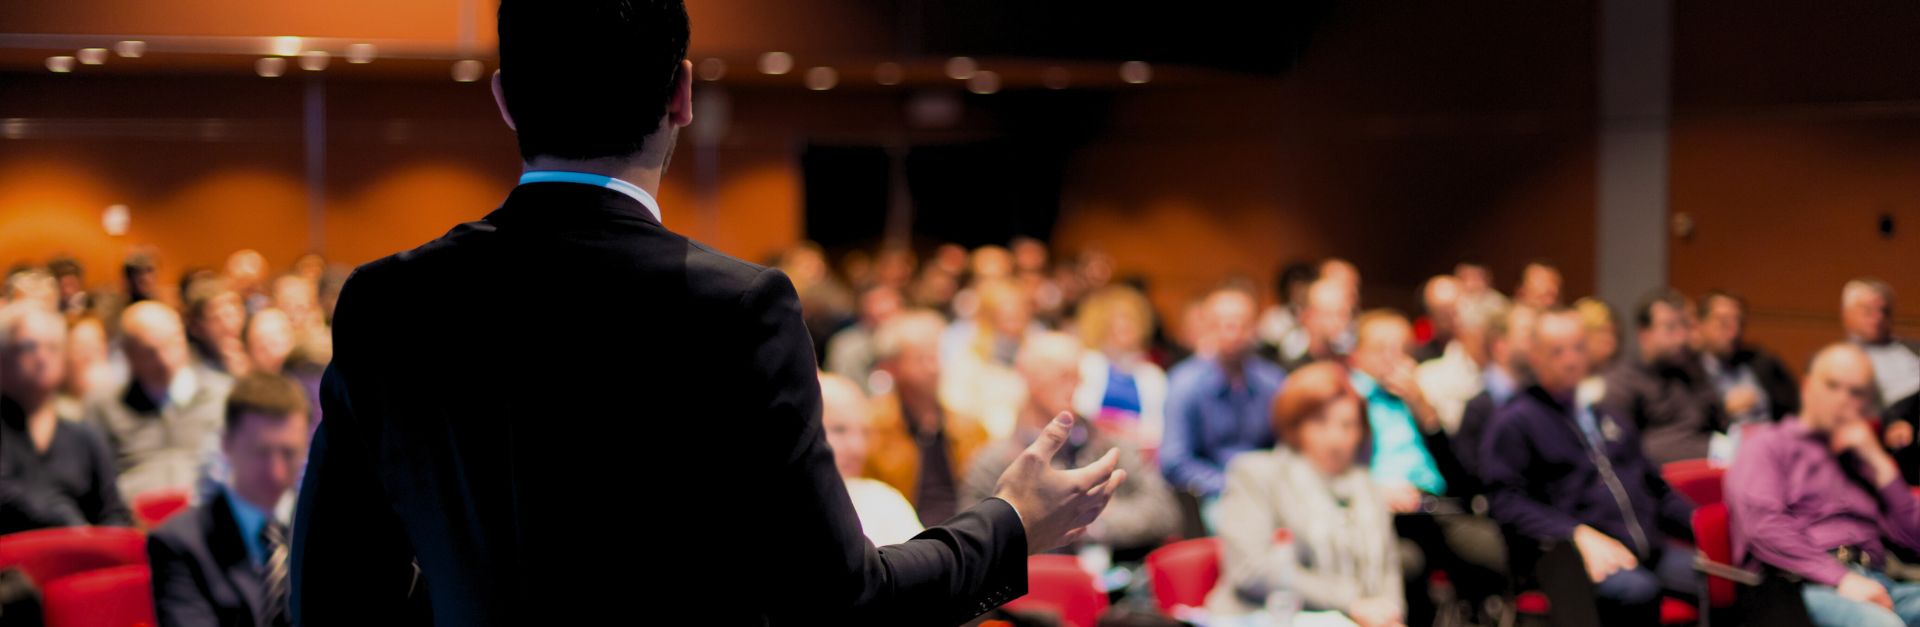 The Most Requested Topics For World-Class Speakers